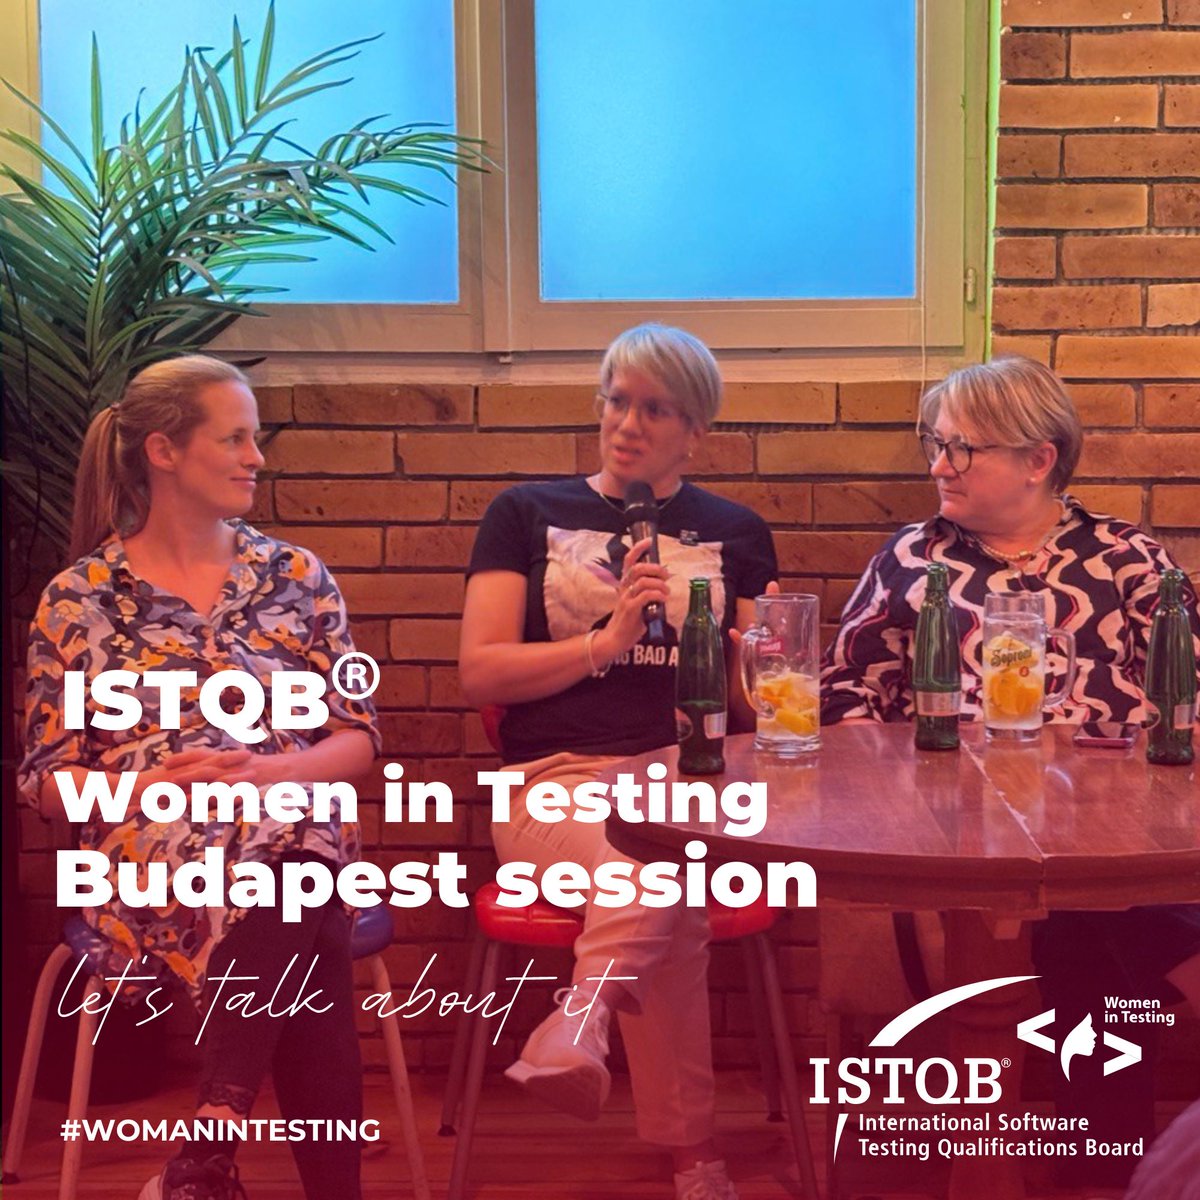 ISTQB® Women in Testing Panel discussion - Budapest session. We had an insightful discussion focused on women's empowerment in IT, spotlighting both opportunities and challenges in the region. Stay tuned for the recorded session. #ISTQB #ISTQBWomeninTesting #WomeninTesting